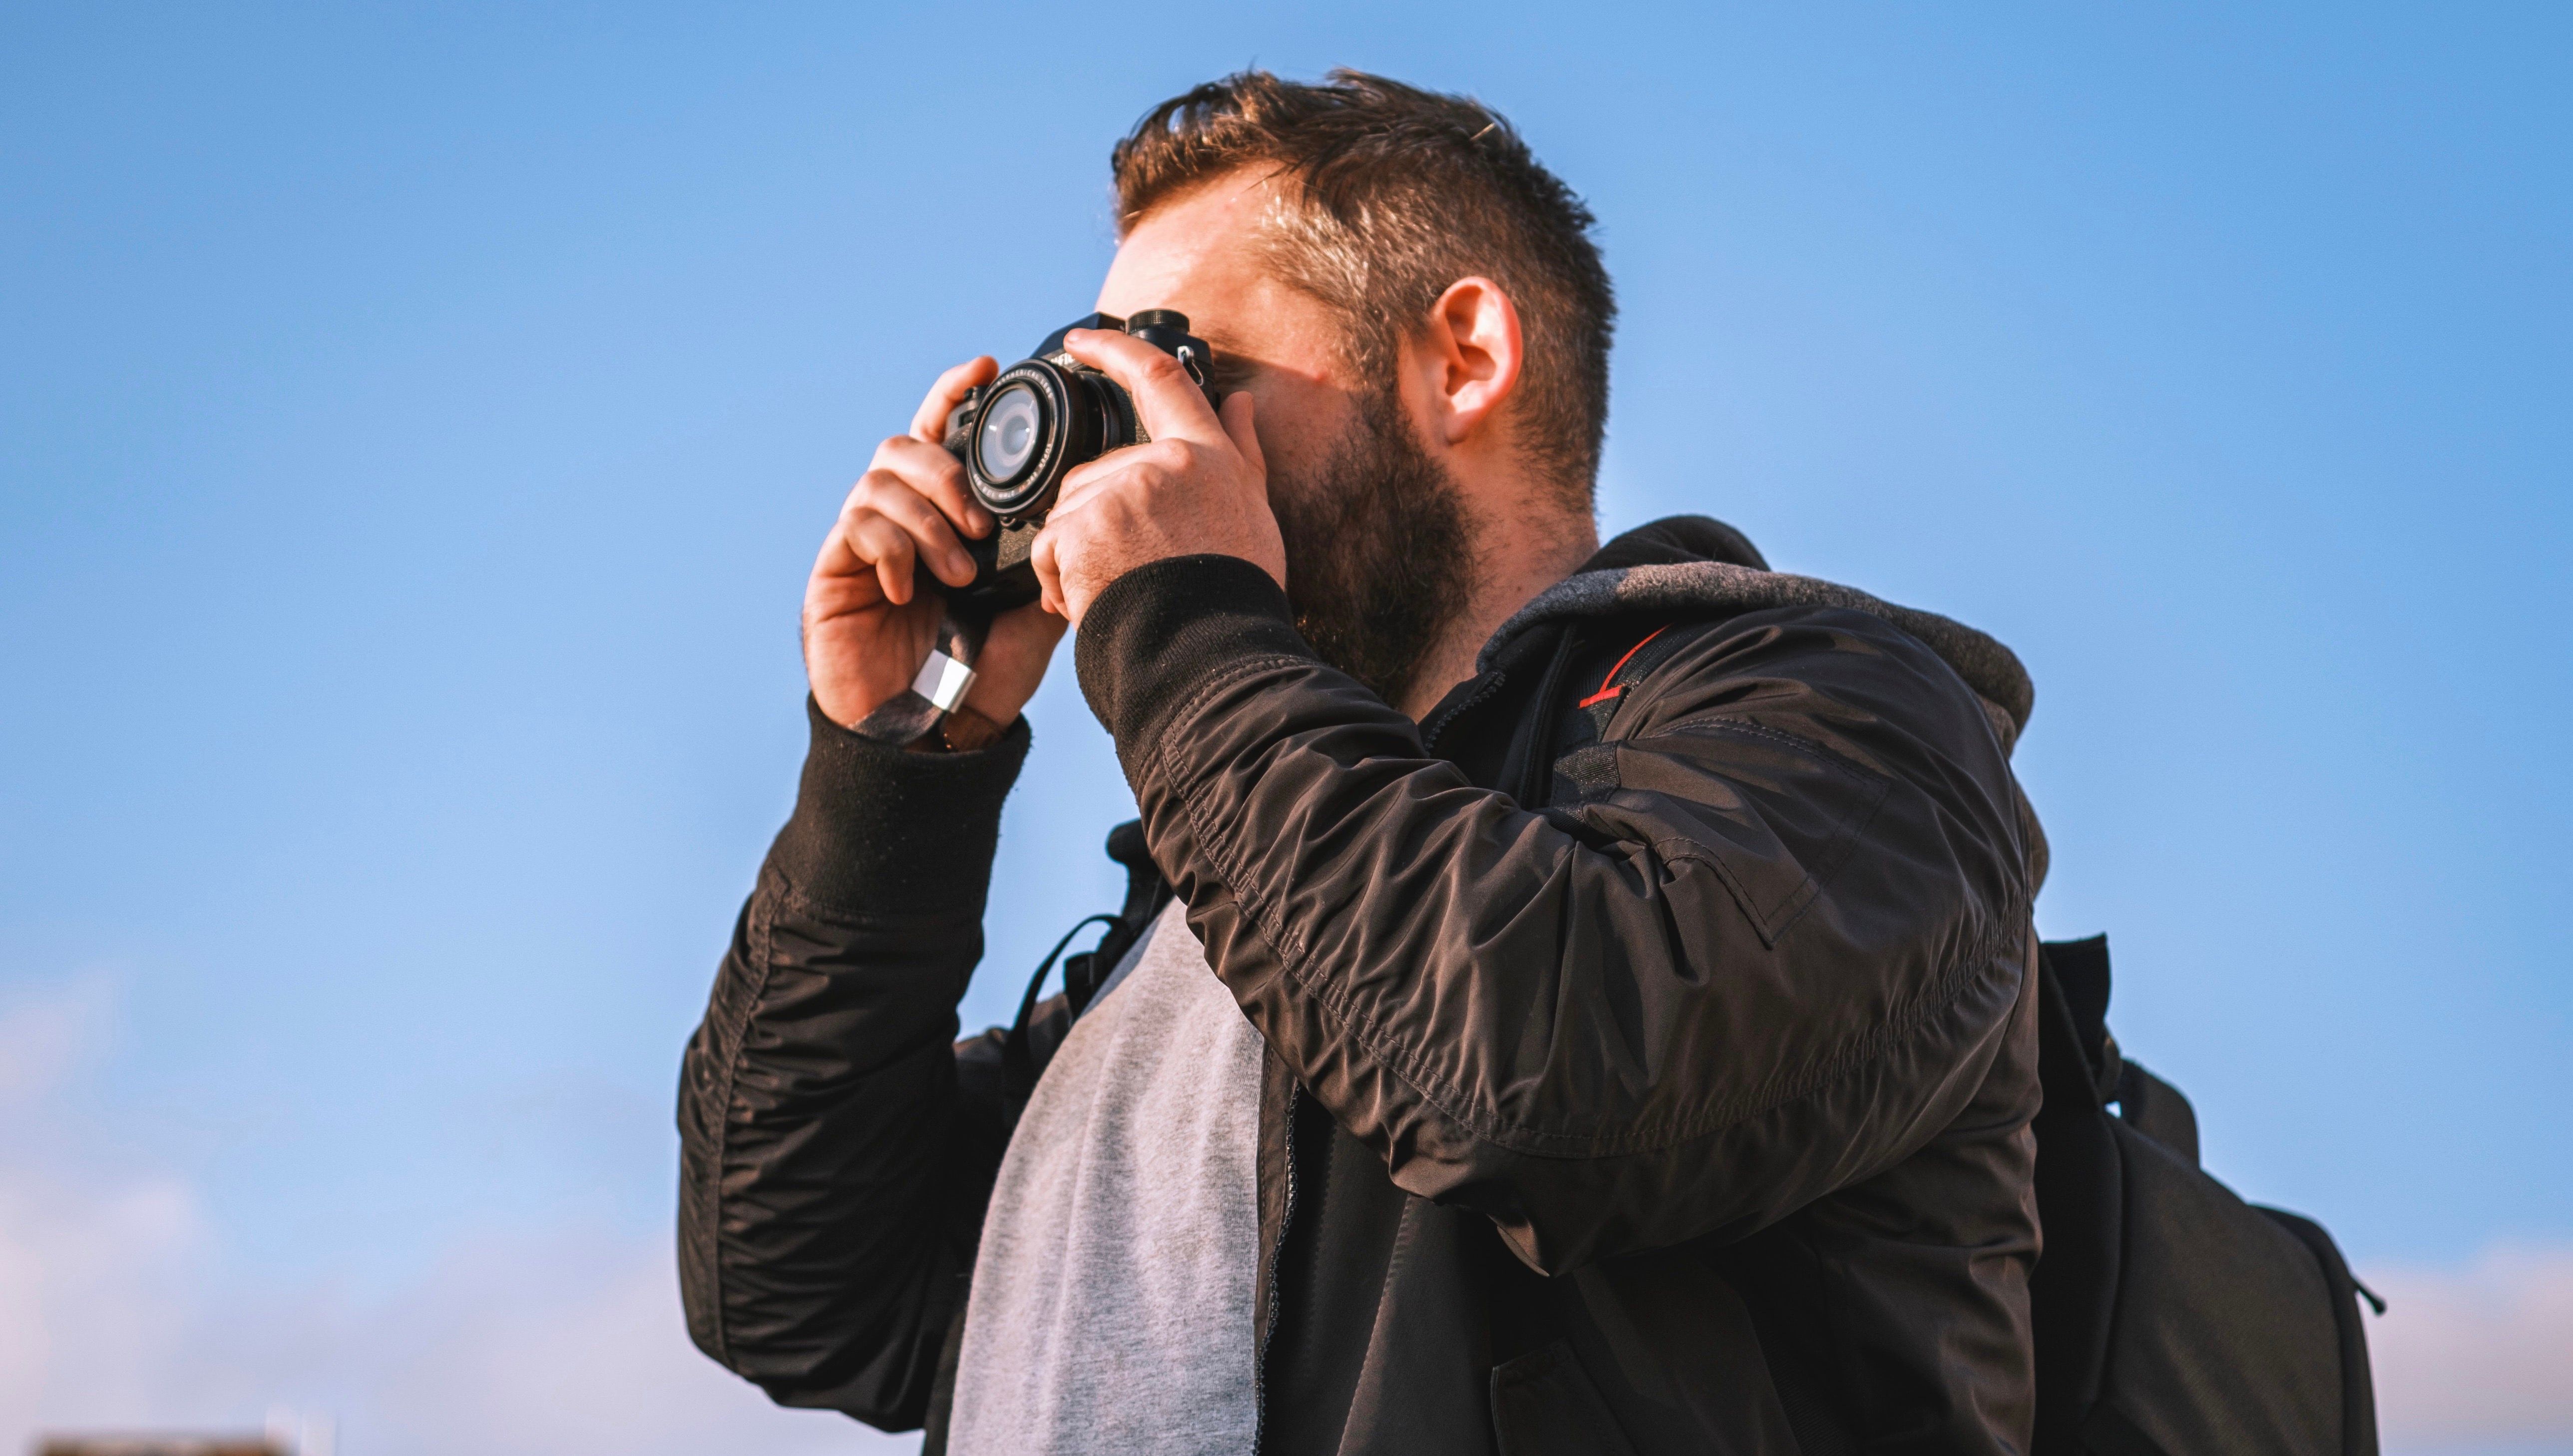 Man holding camera to face with blue sky behind him